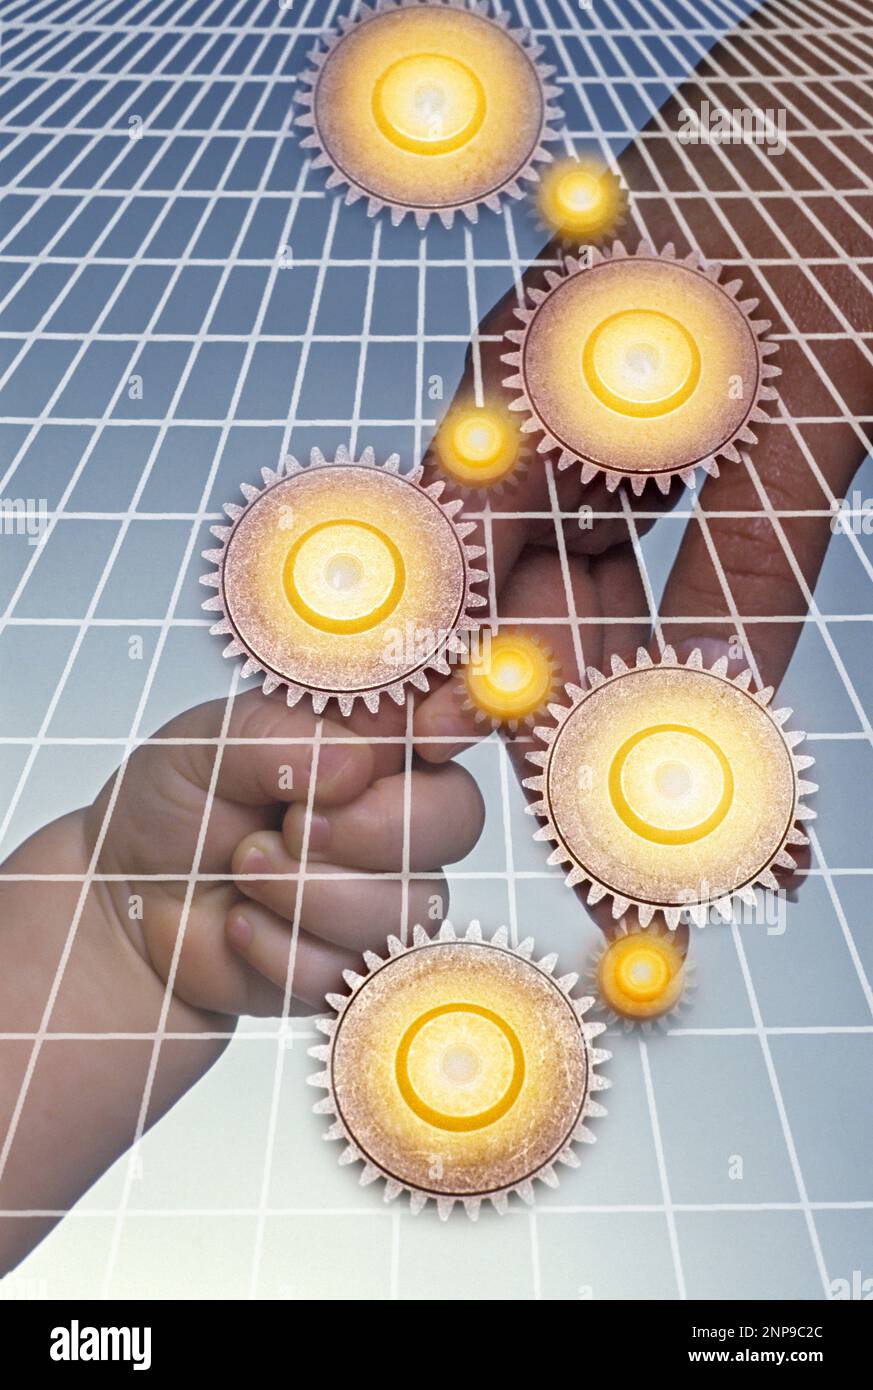 INTERLOCKING COG GEARS OVER MOTHER HOLDING INFANT BABY HANDS Stock Photo